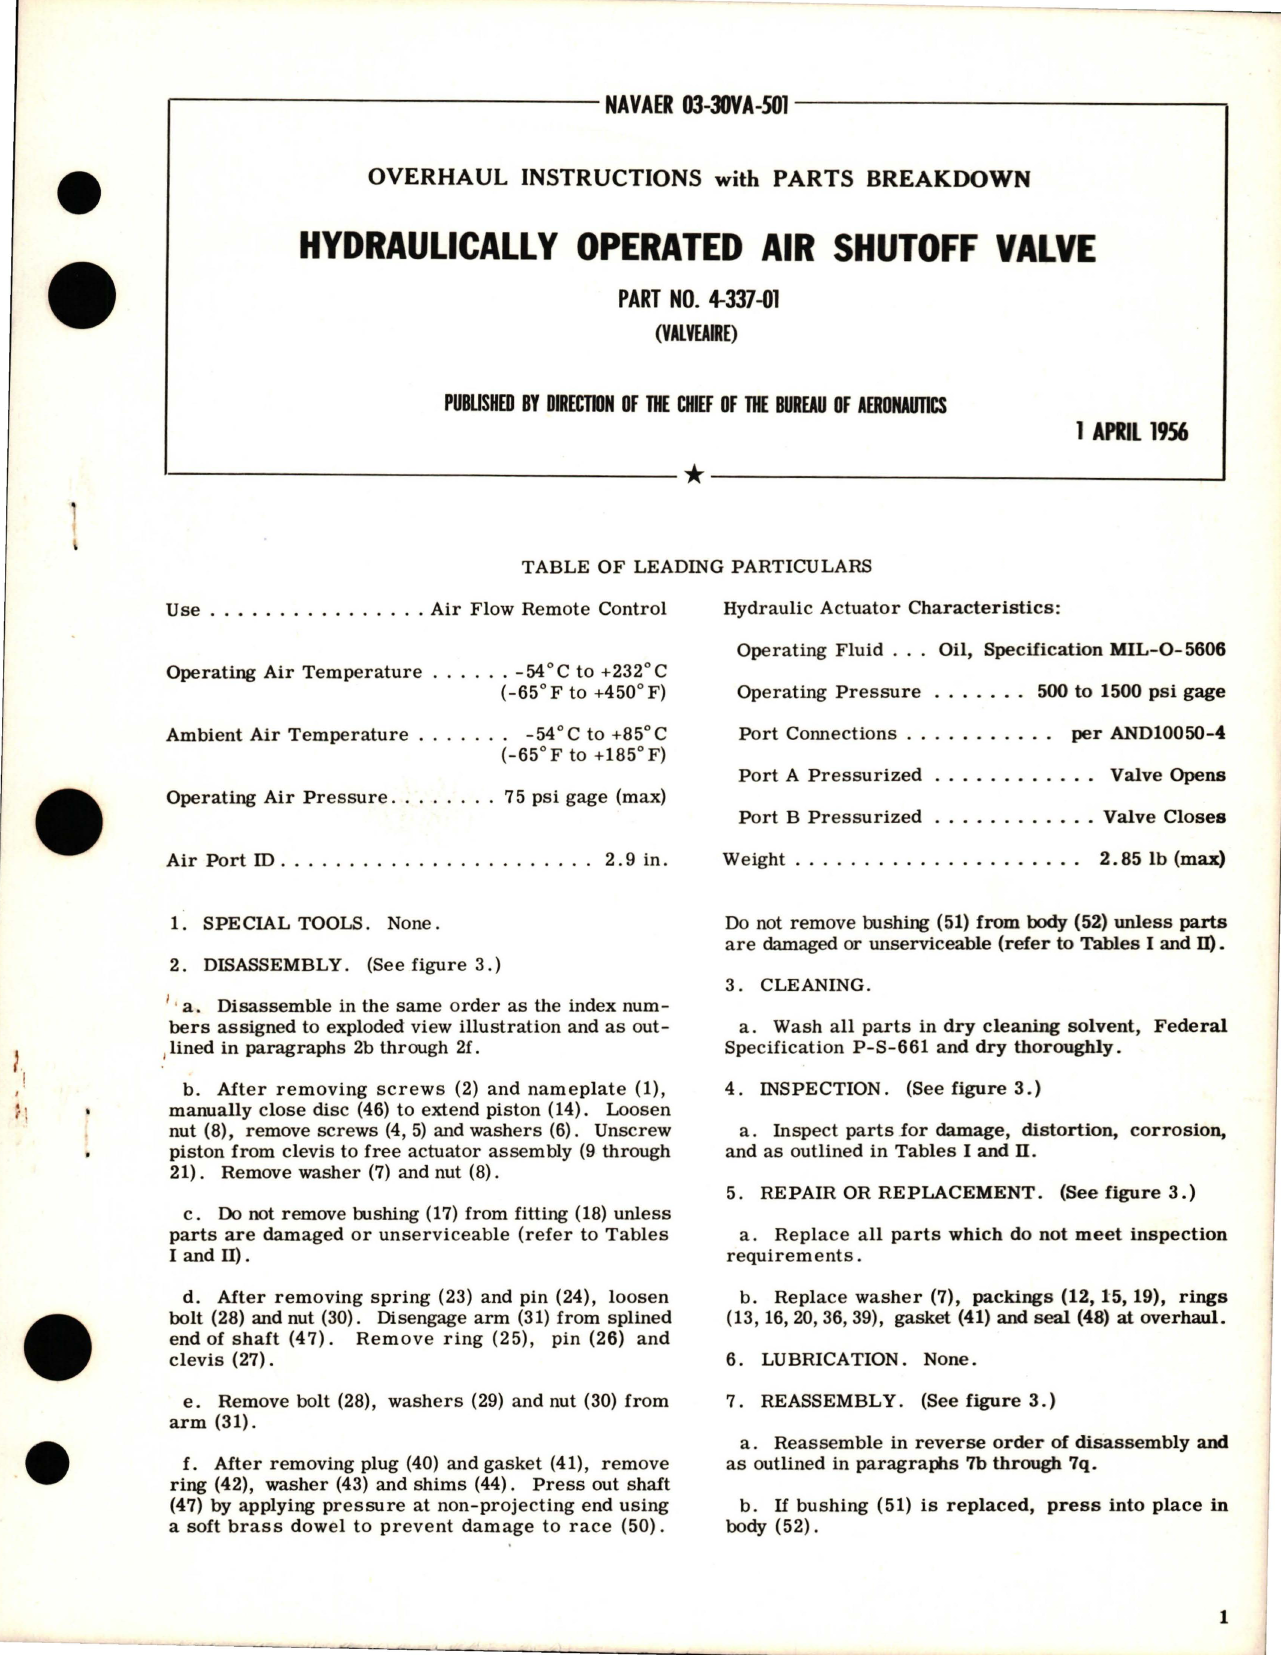 Sample page 1 from AirCorps Library document: Overhaul Instructions with Parts Breakdown for Hydraulically Operated Air Shutoff Valve - Part 4-337-01